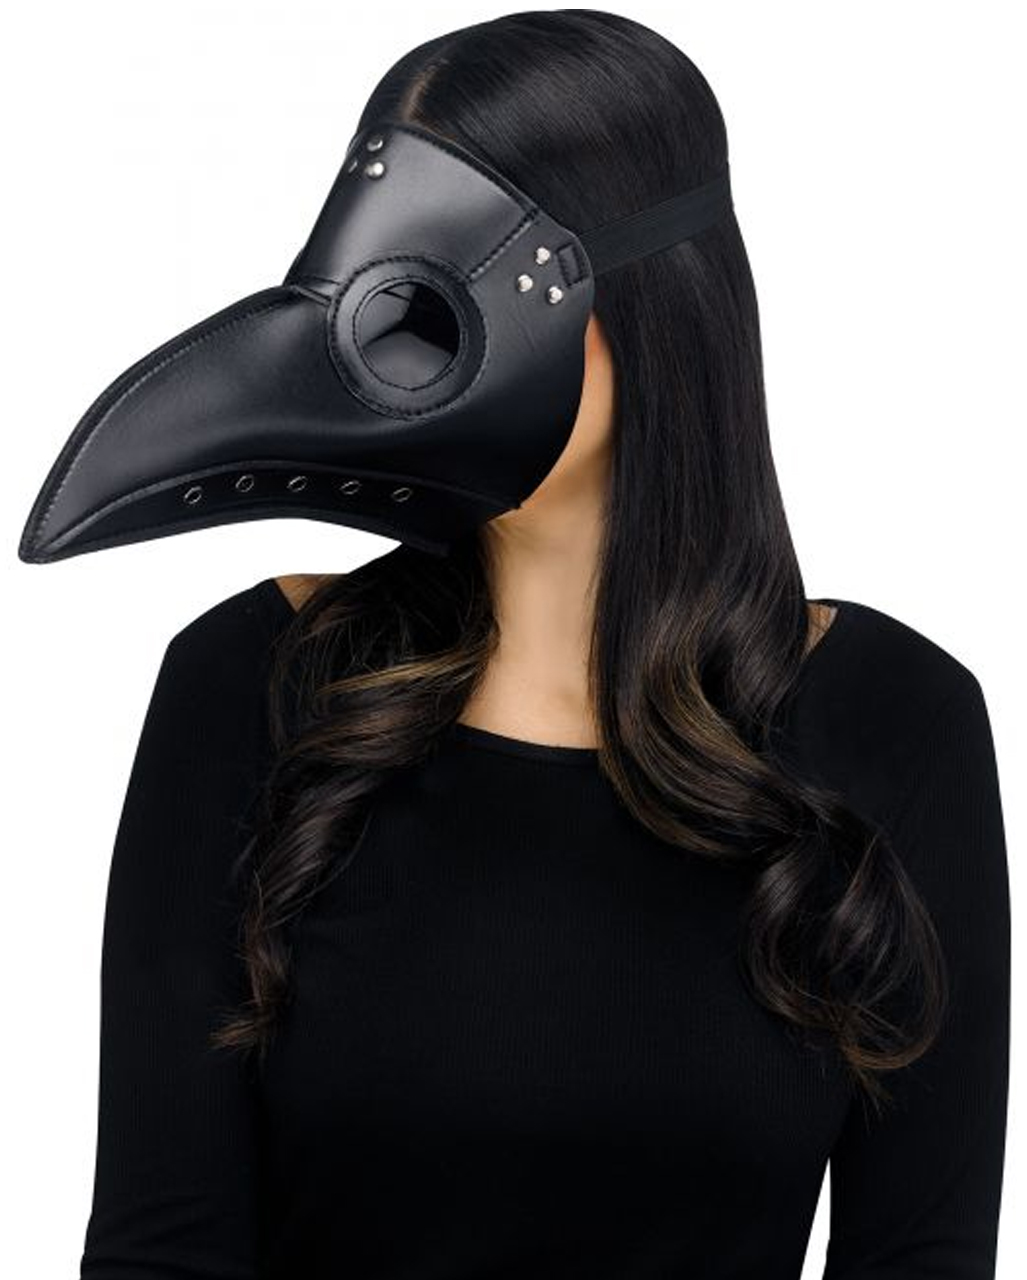 Faux Leather Plague Doctor Mask Black Steampunk Dr Long Nose Gothic Medieval 